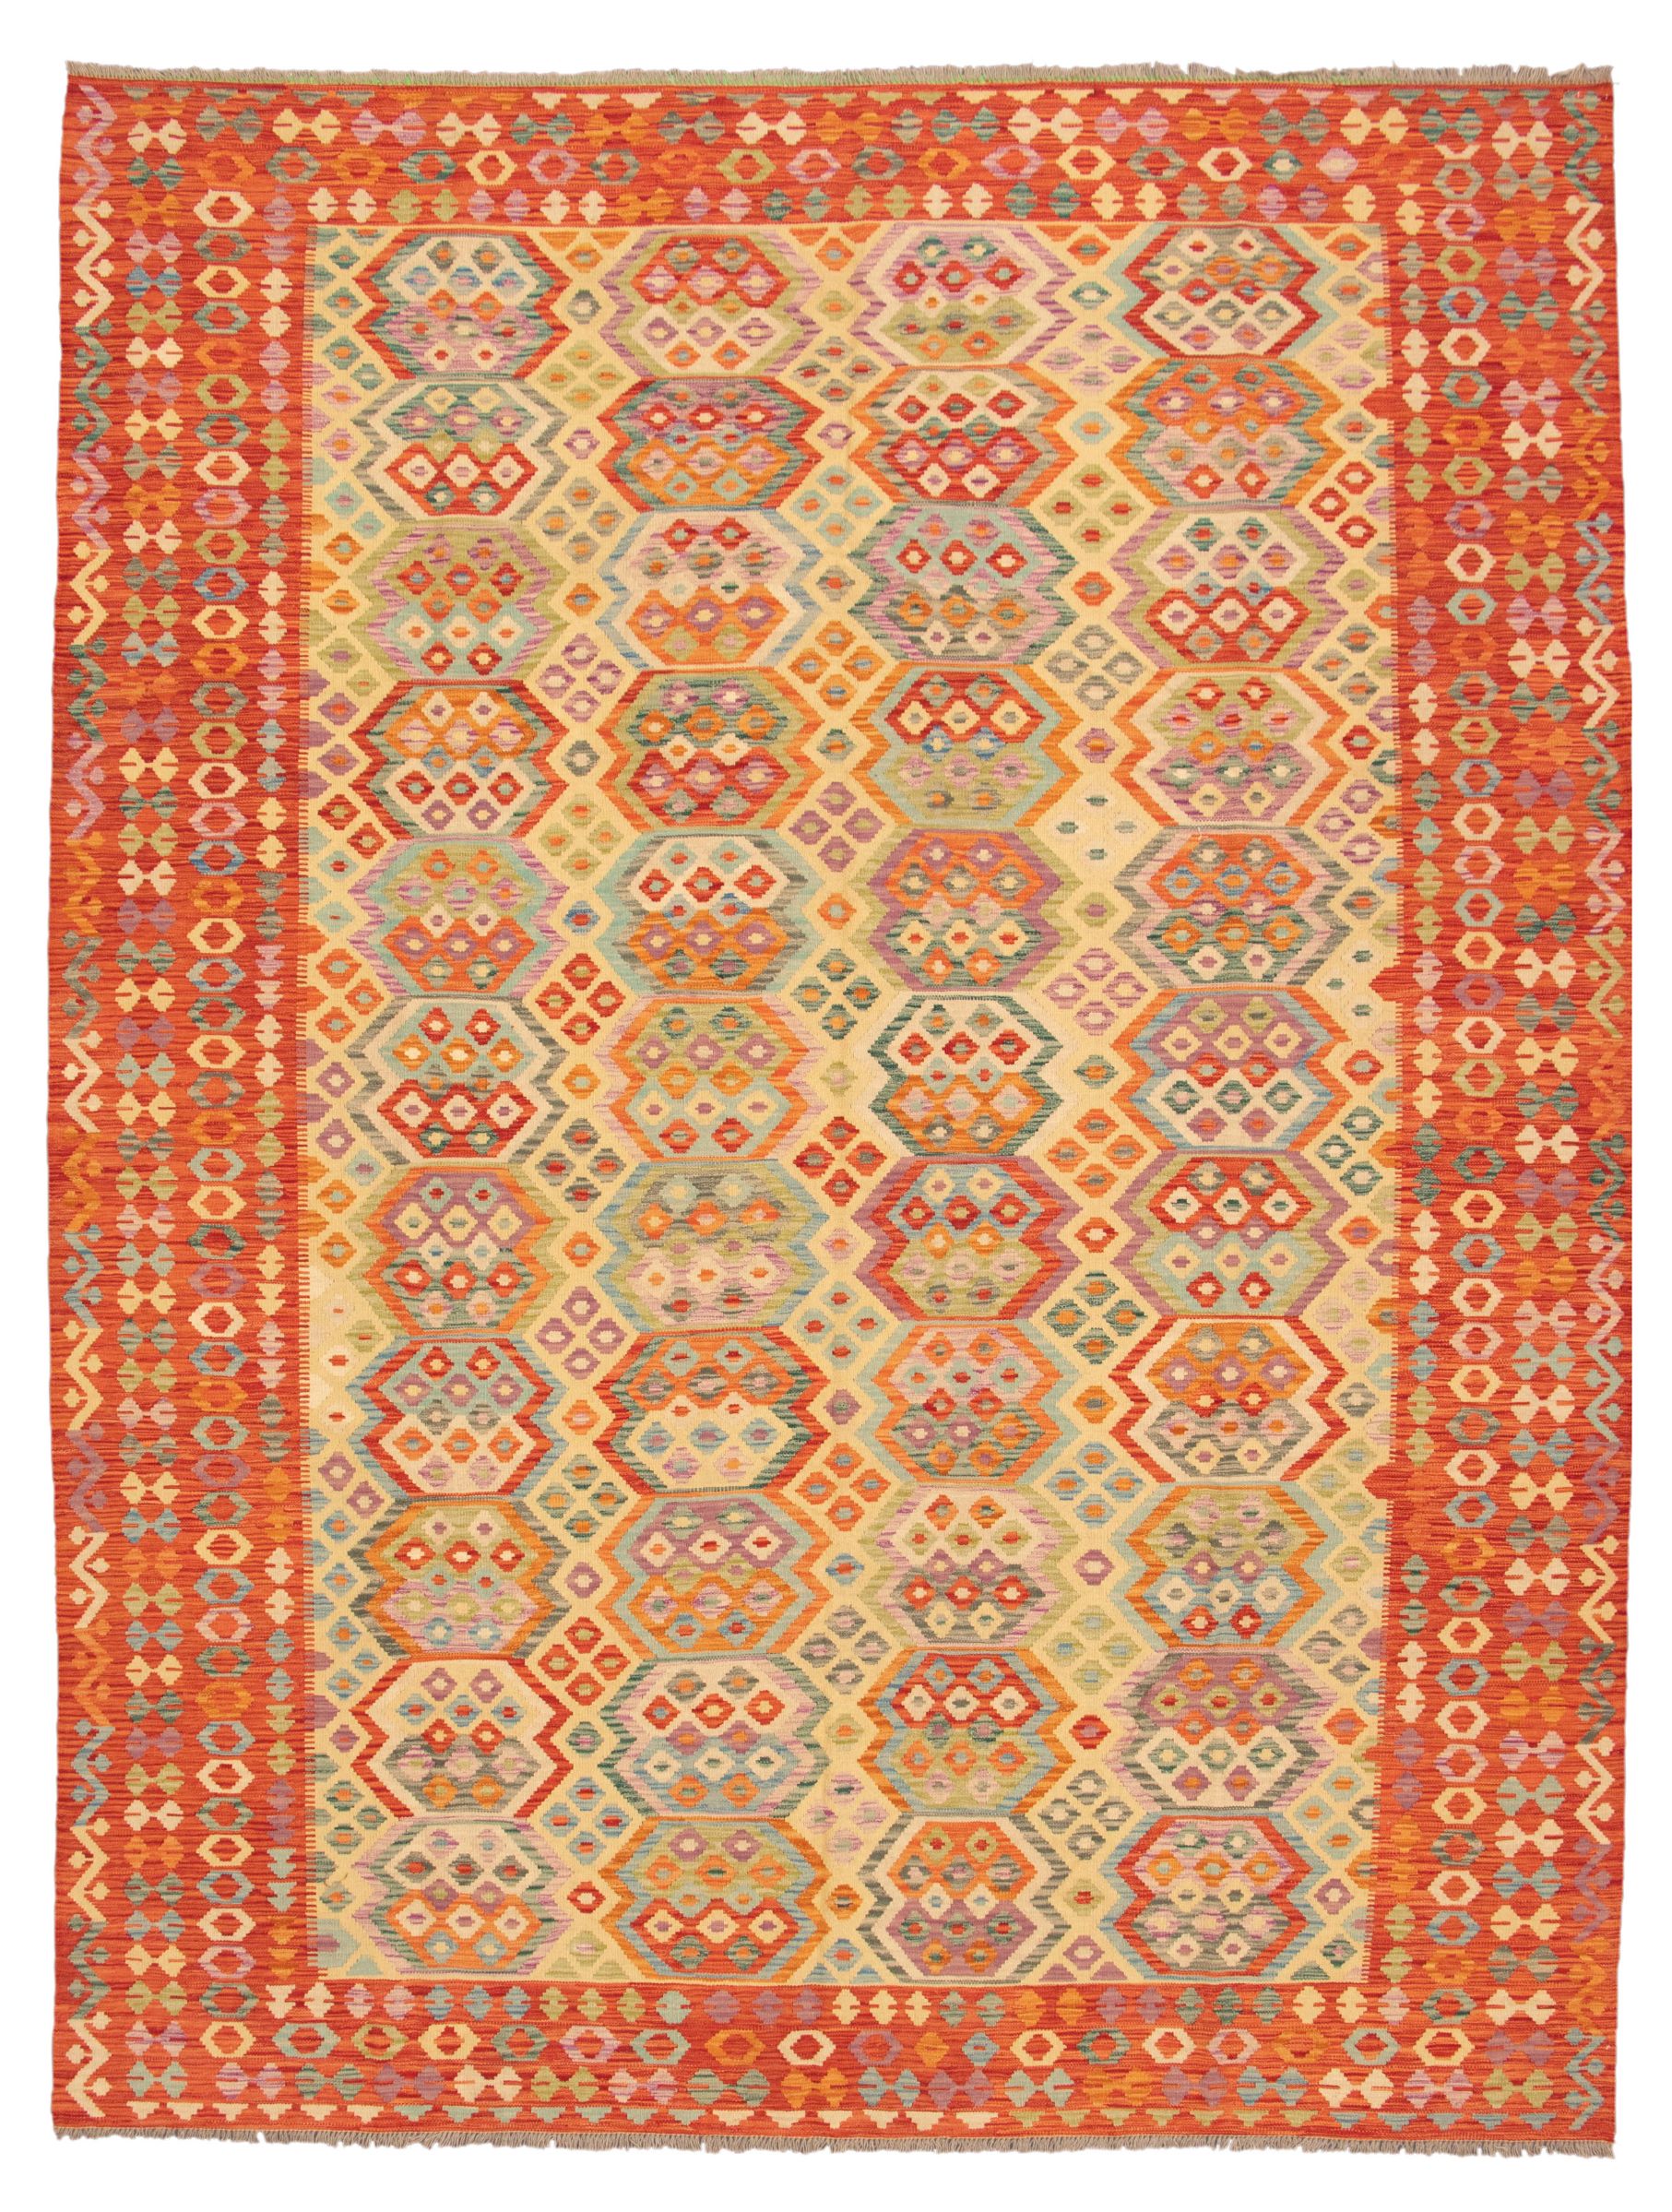 Hand woven Bold and Colorful  Ivory, Red Wool Kilim 9'3" x 12'2" Size: 9'3" x 12'2"  